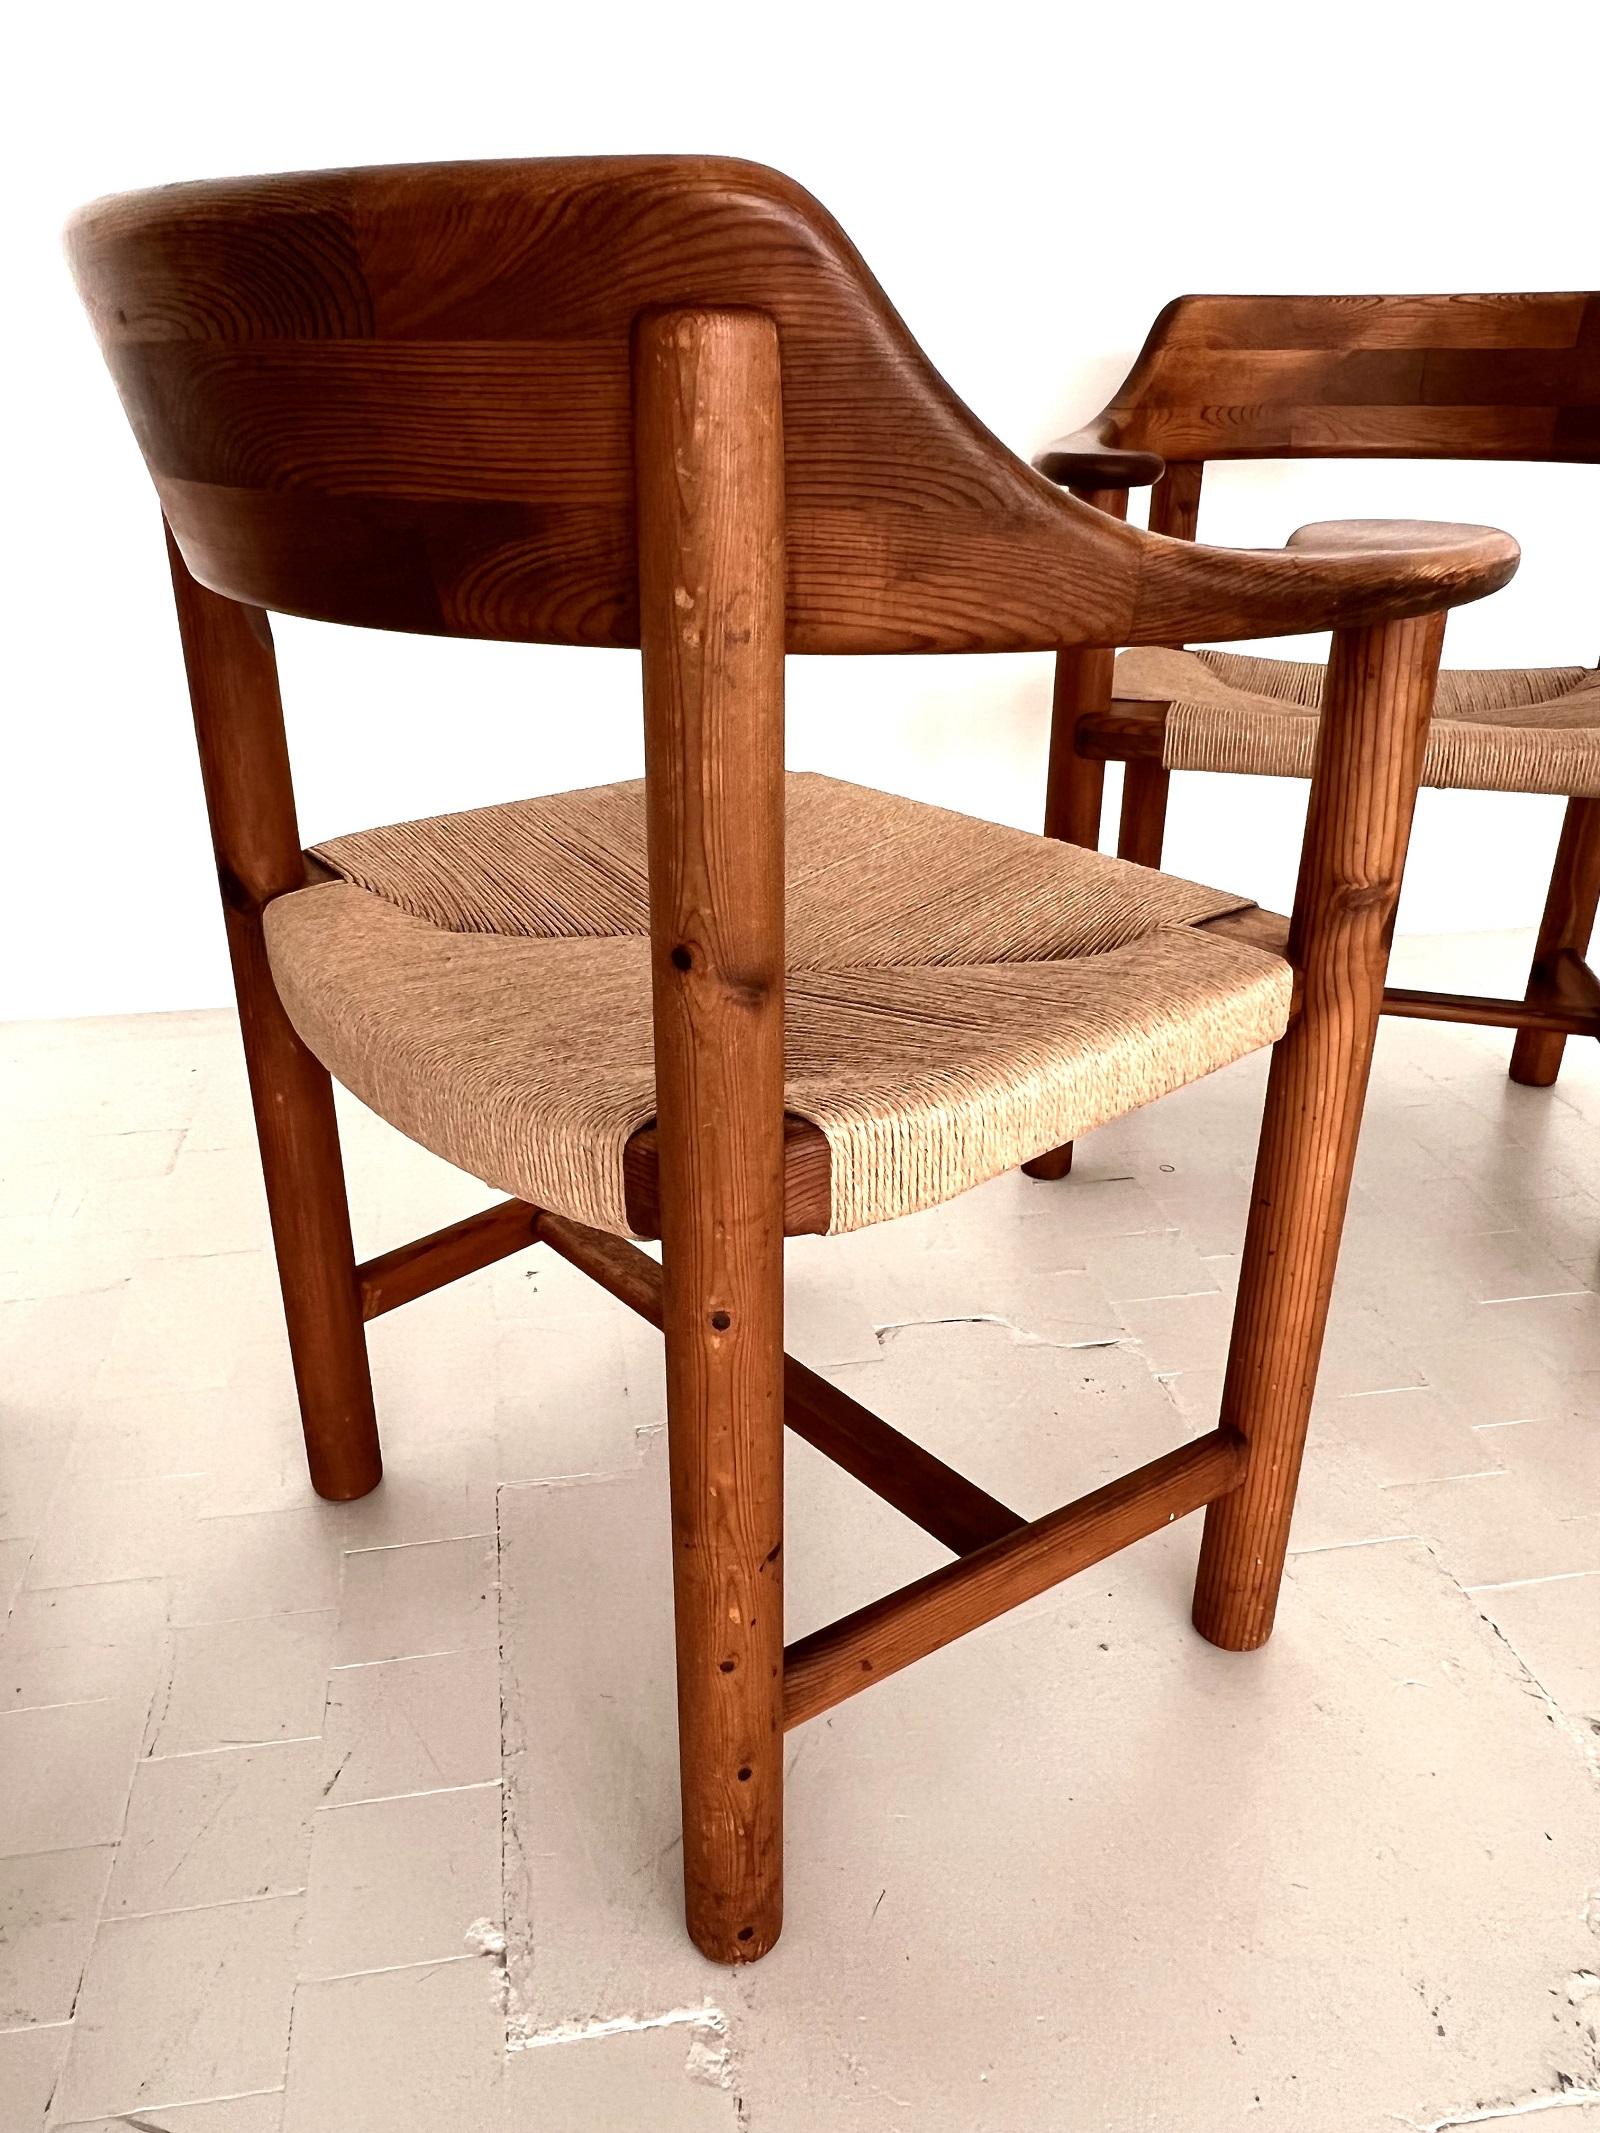 Hand-Crafted Rainer Daumiller Dining Chairs in Pine and New Paper Cord, 1970s For Sale